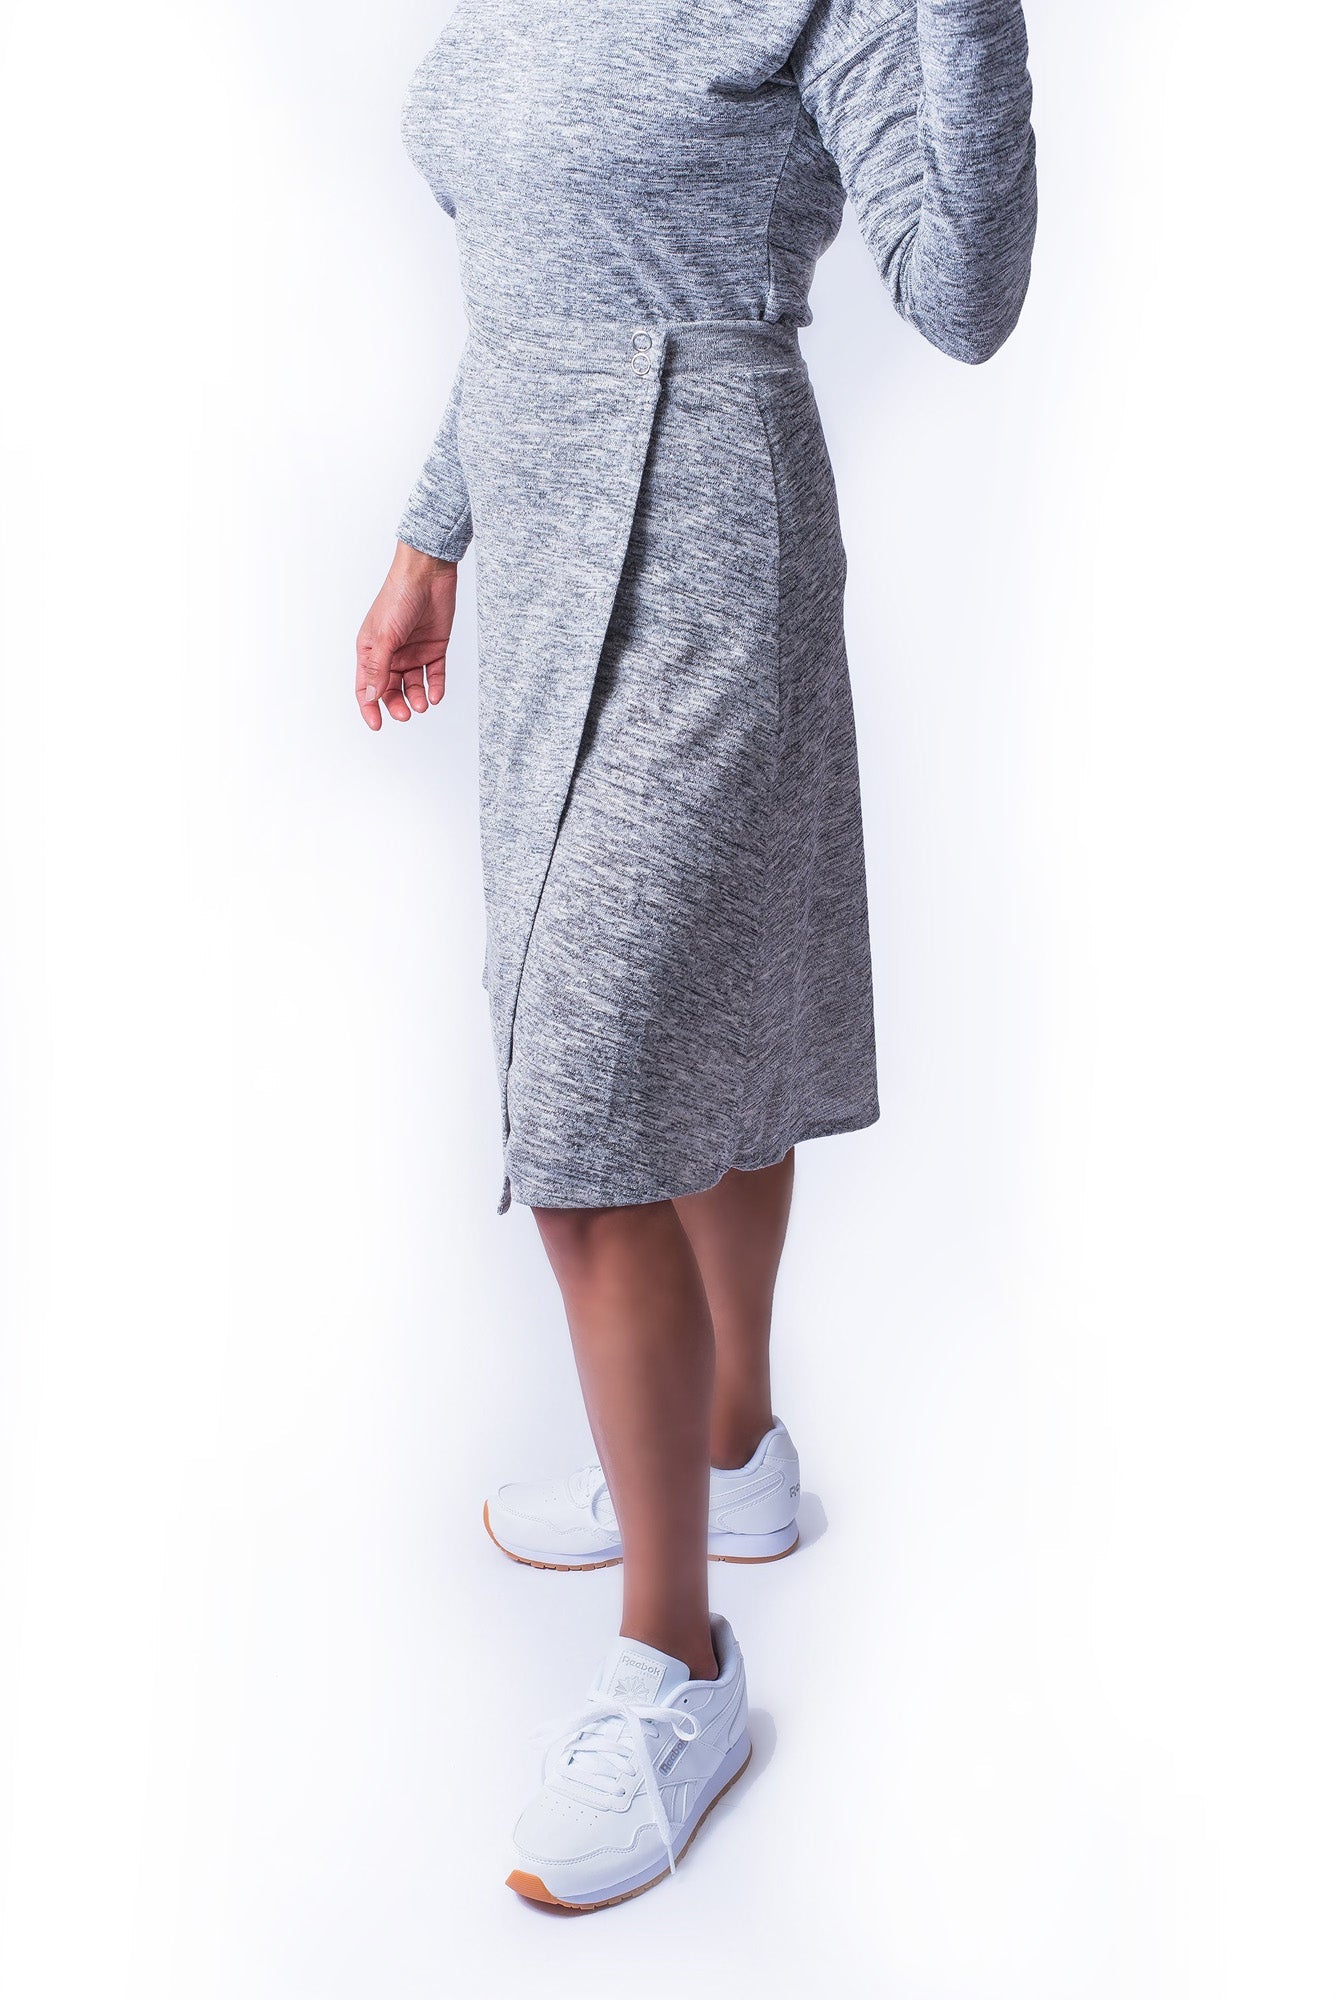 Woman wearing grey wrap skirt with snap closure waist band and matching grey top.